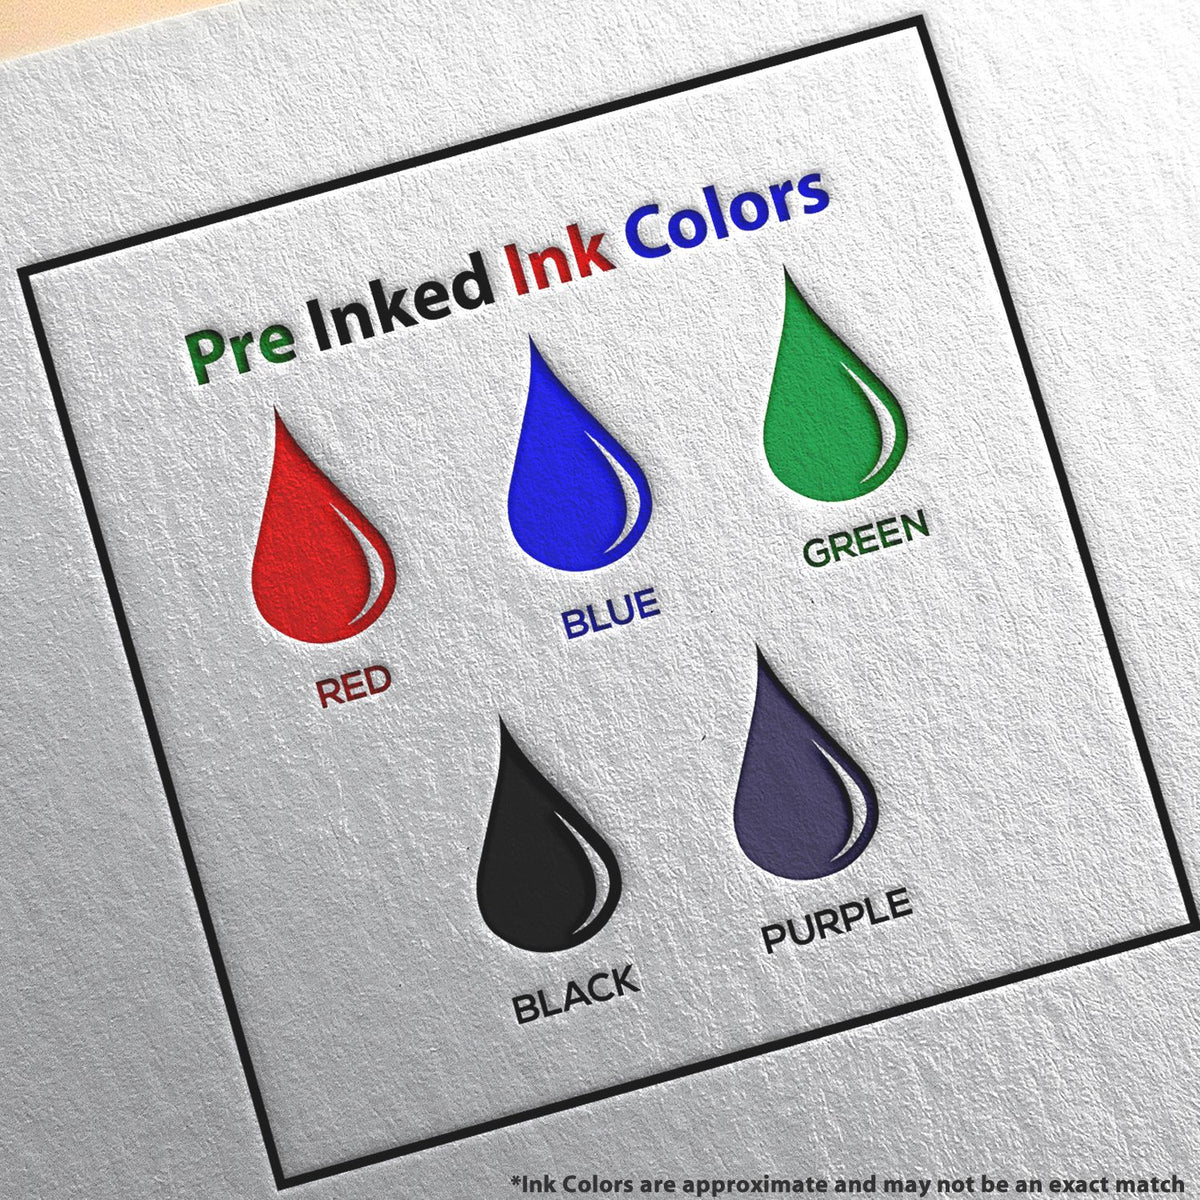 A picture showing the different ink colors or hues available for the Slim Pre-Inked Nevada Land Surveyor Seal Stamp product.